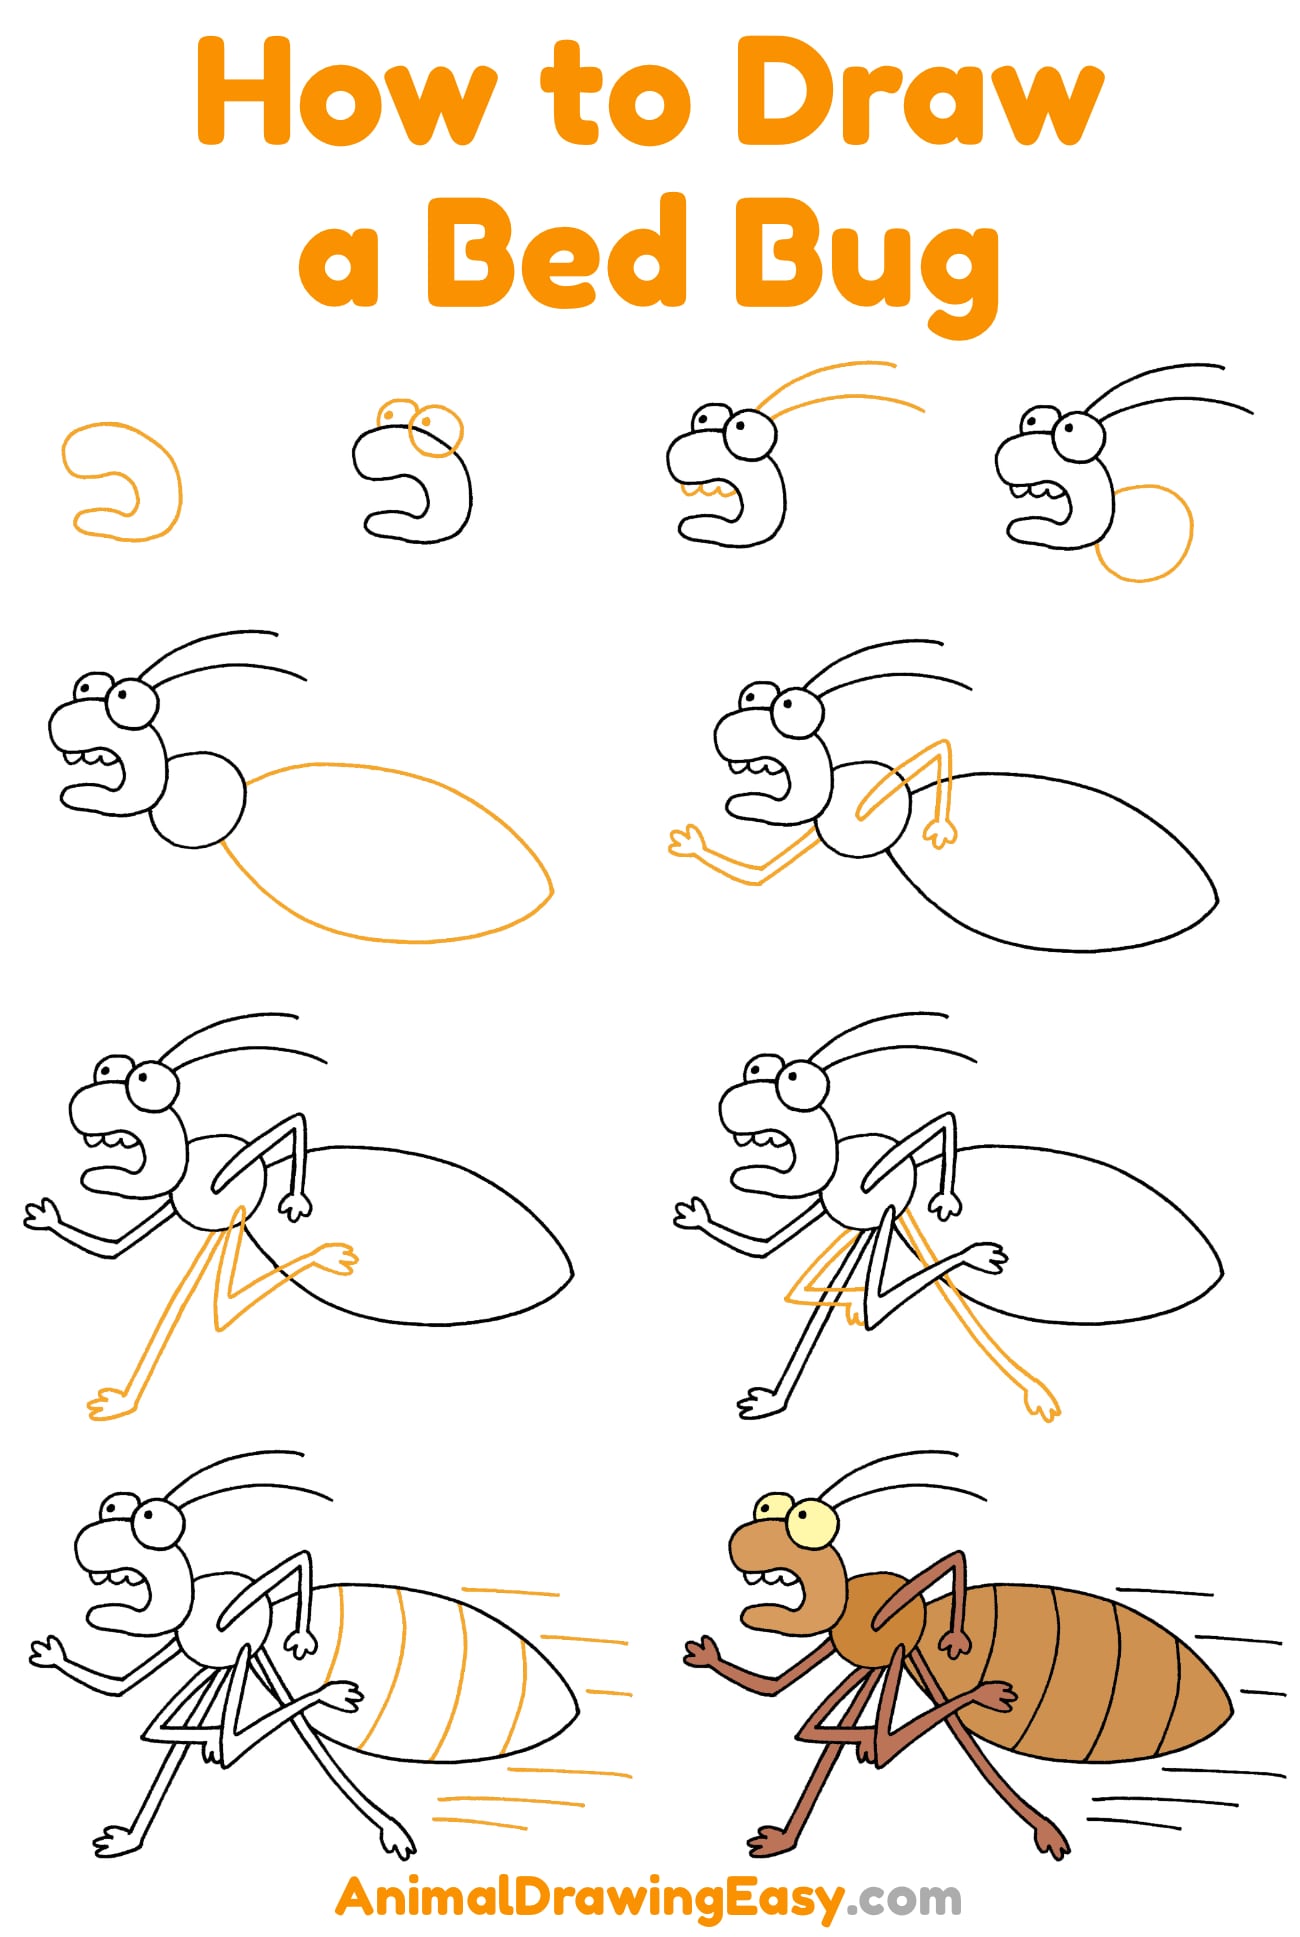 How to Draw a Bed bug Step by Step